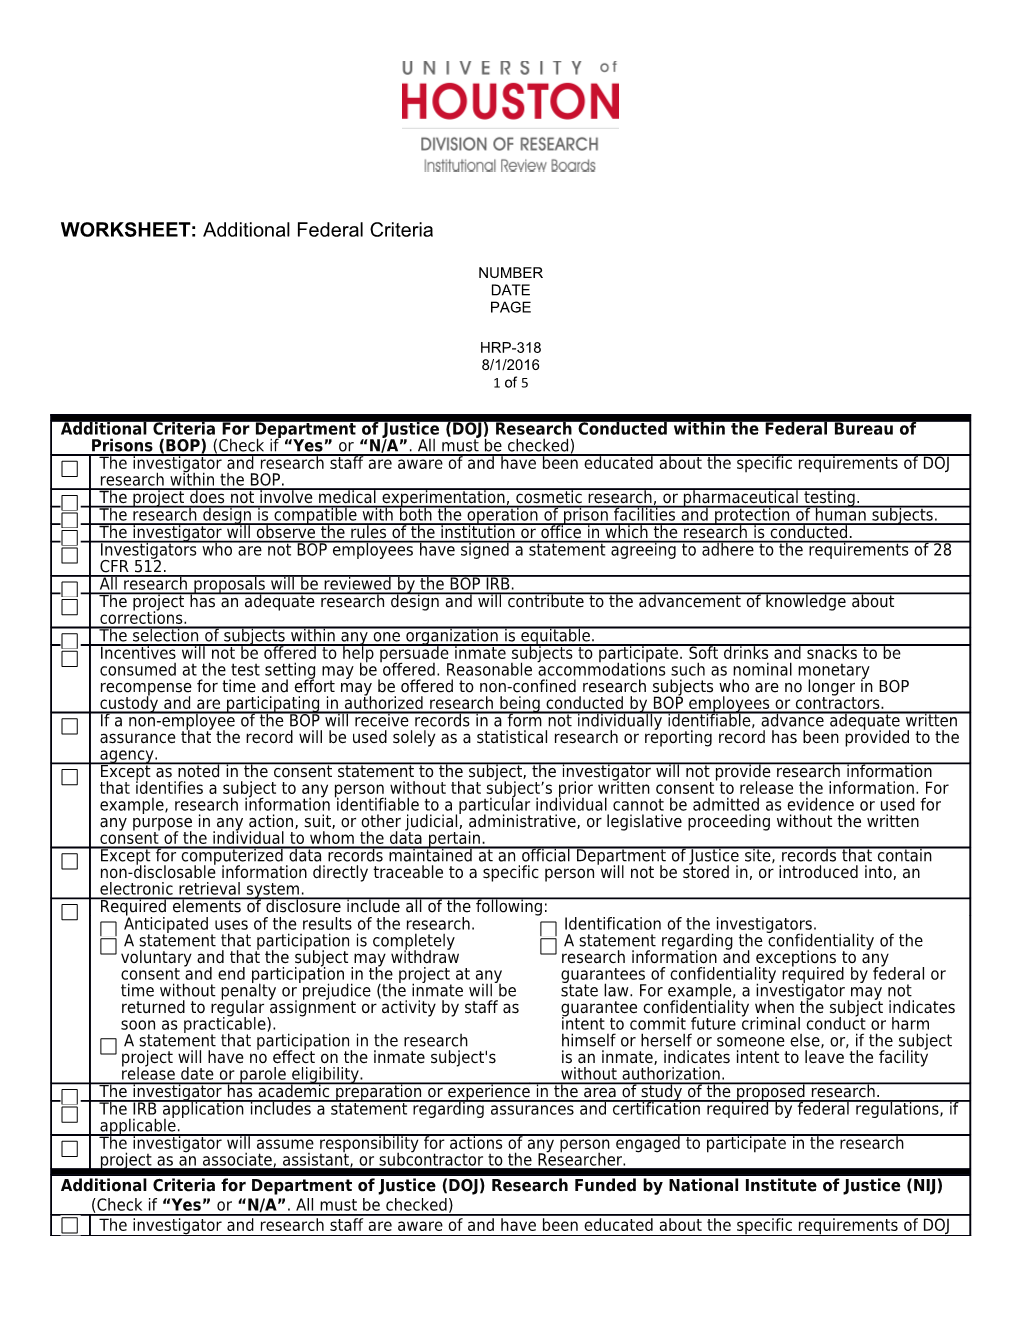 WORKSHEET: Criteria for Approval and Additional Considerations